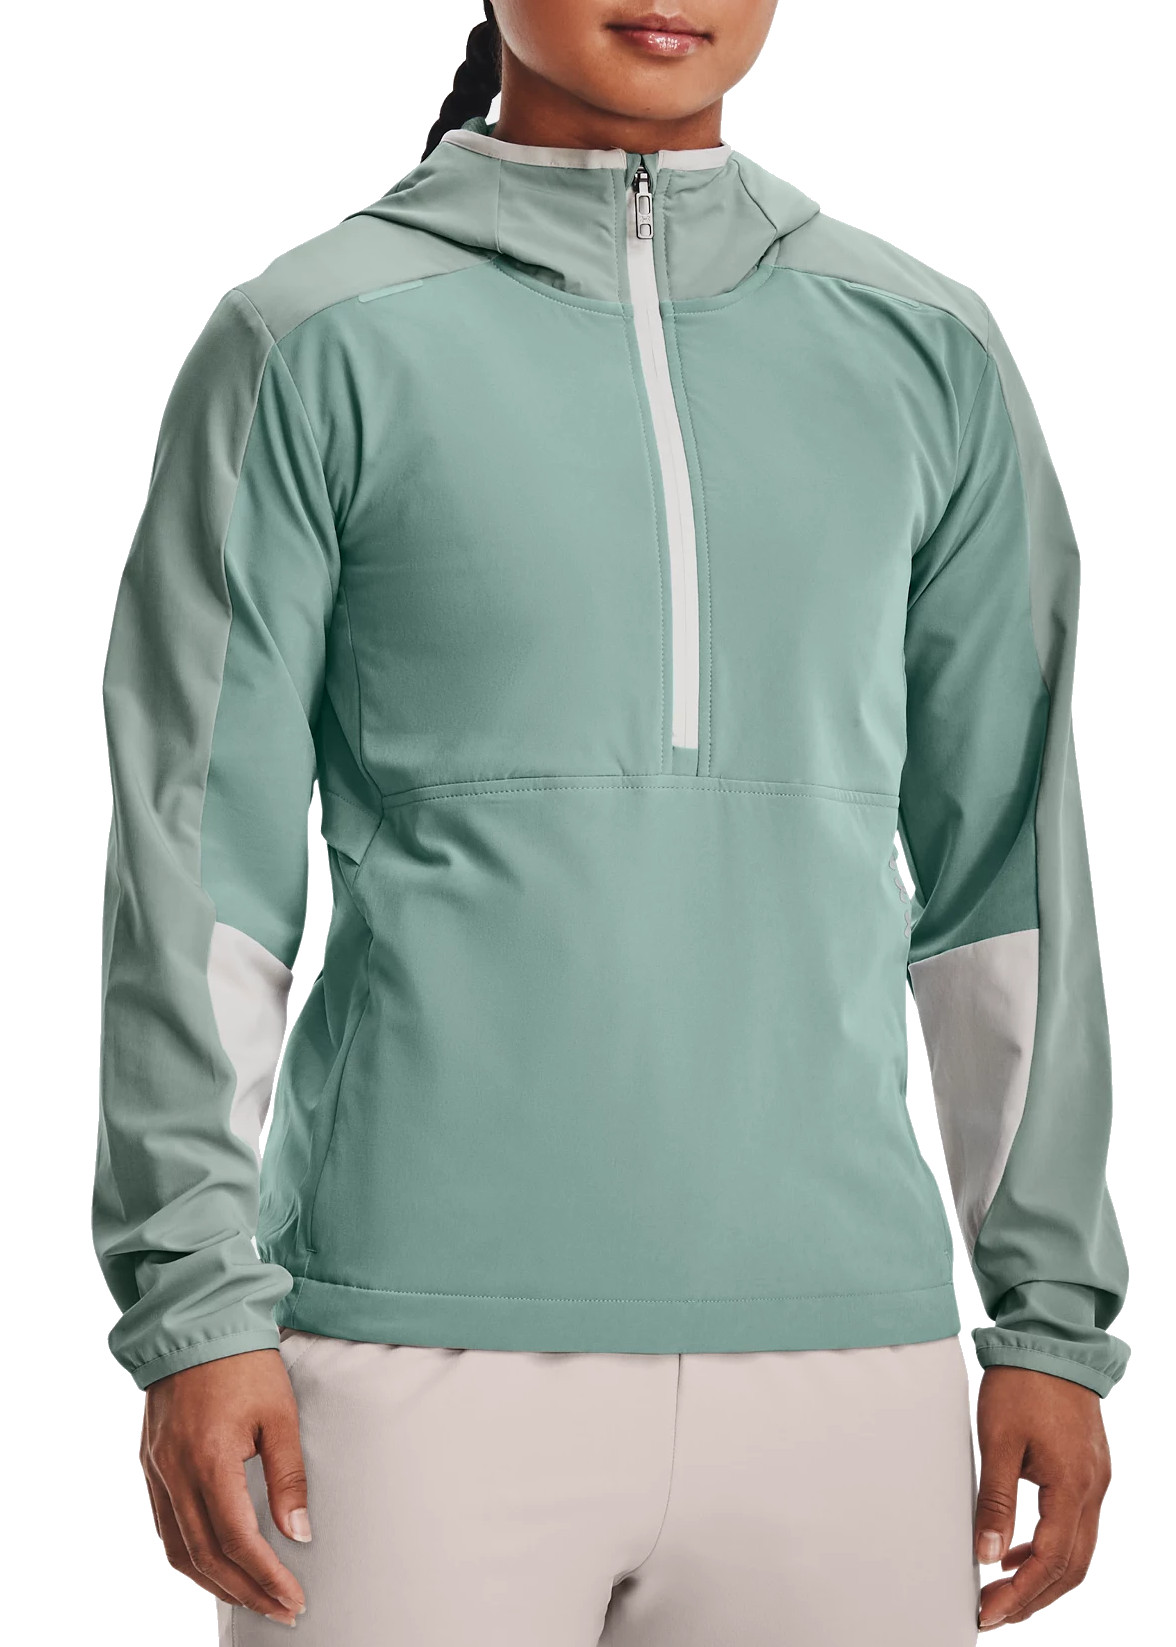 Hooded jacket Under Armour Terrain Storm Layer